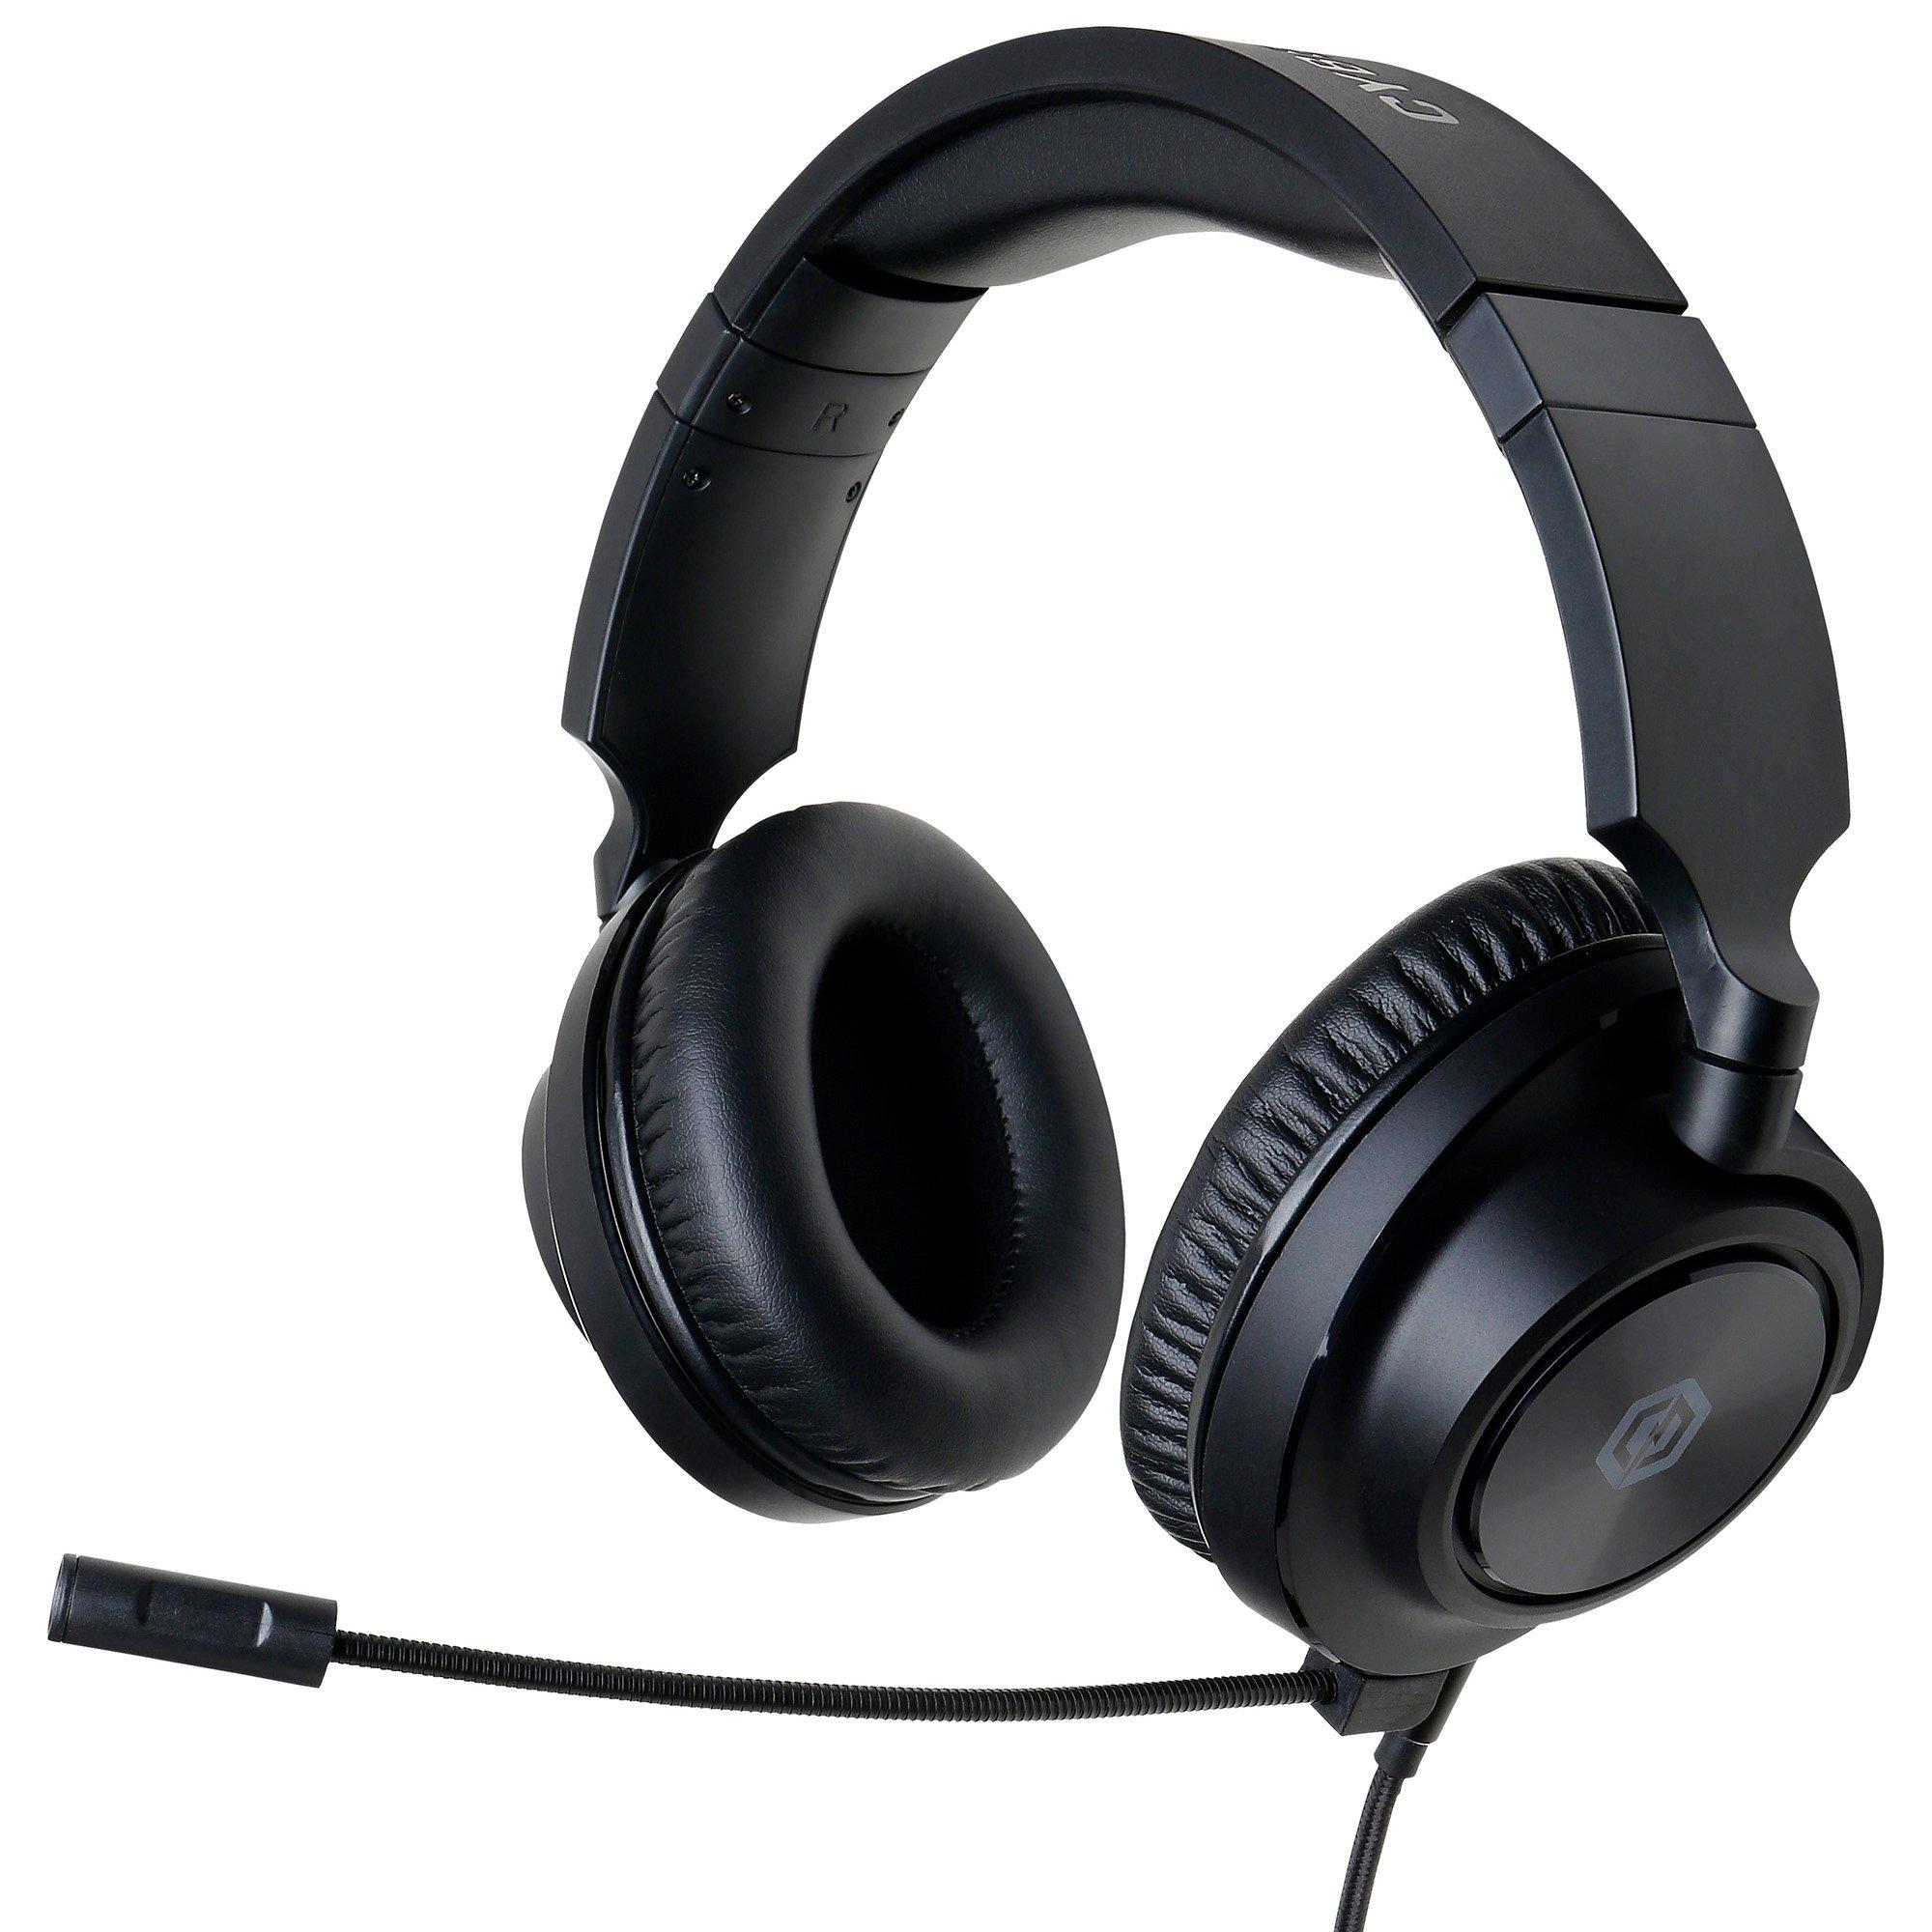 CYBERPOWERPC Spectre 01 Wired Gaming Headset